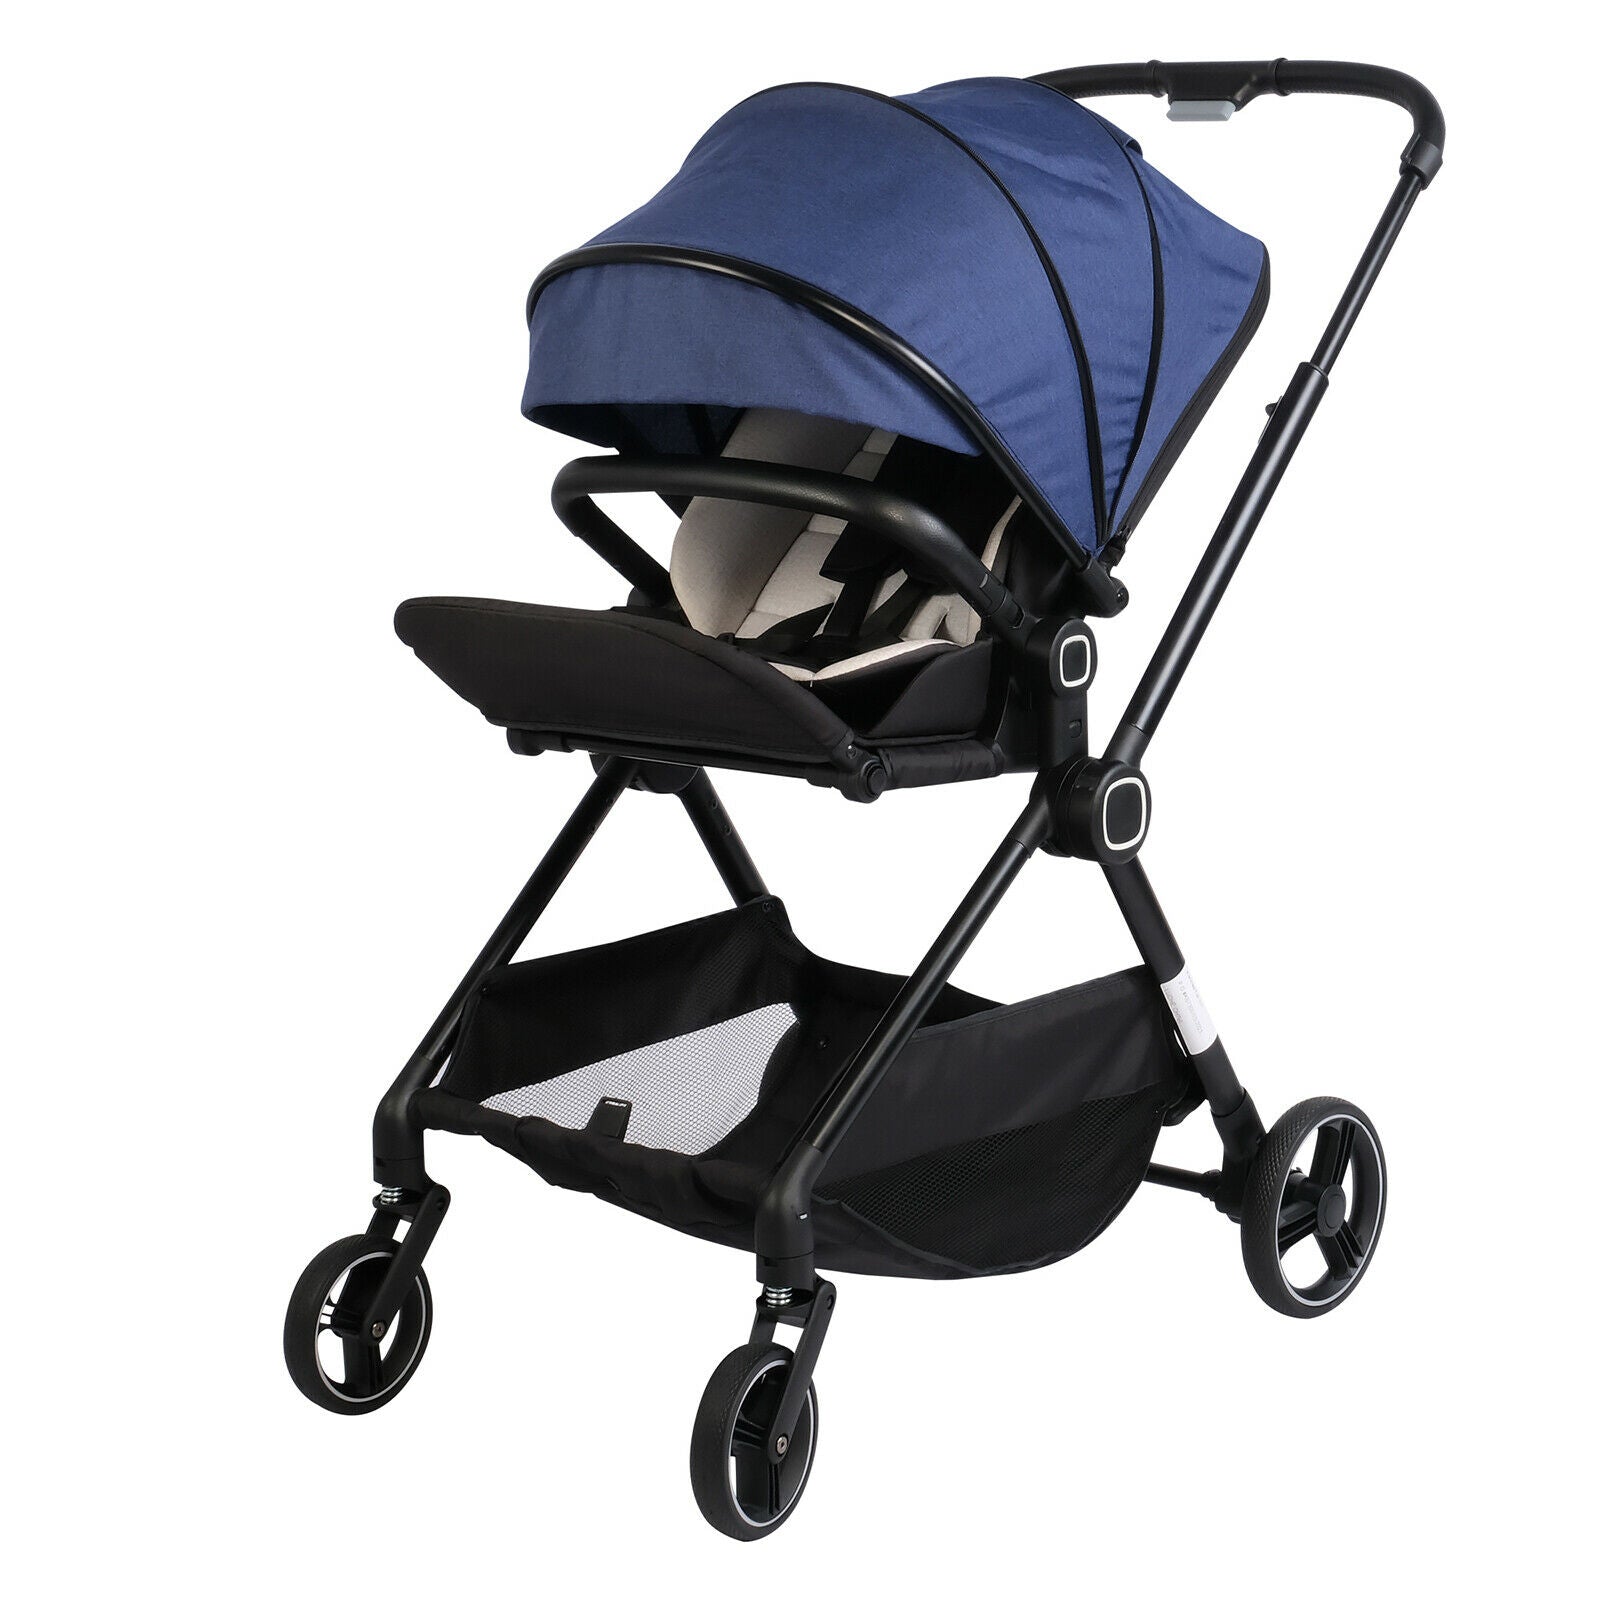 Foldable Compact Travel Strollers 5-Point Harness Infant Stroller w/ Reversible Handle, Adjustable Canopy & Backrest